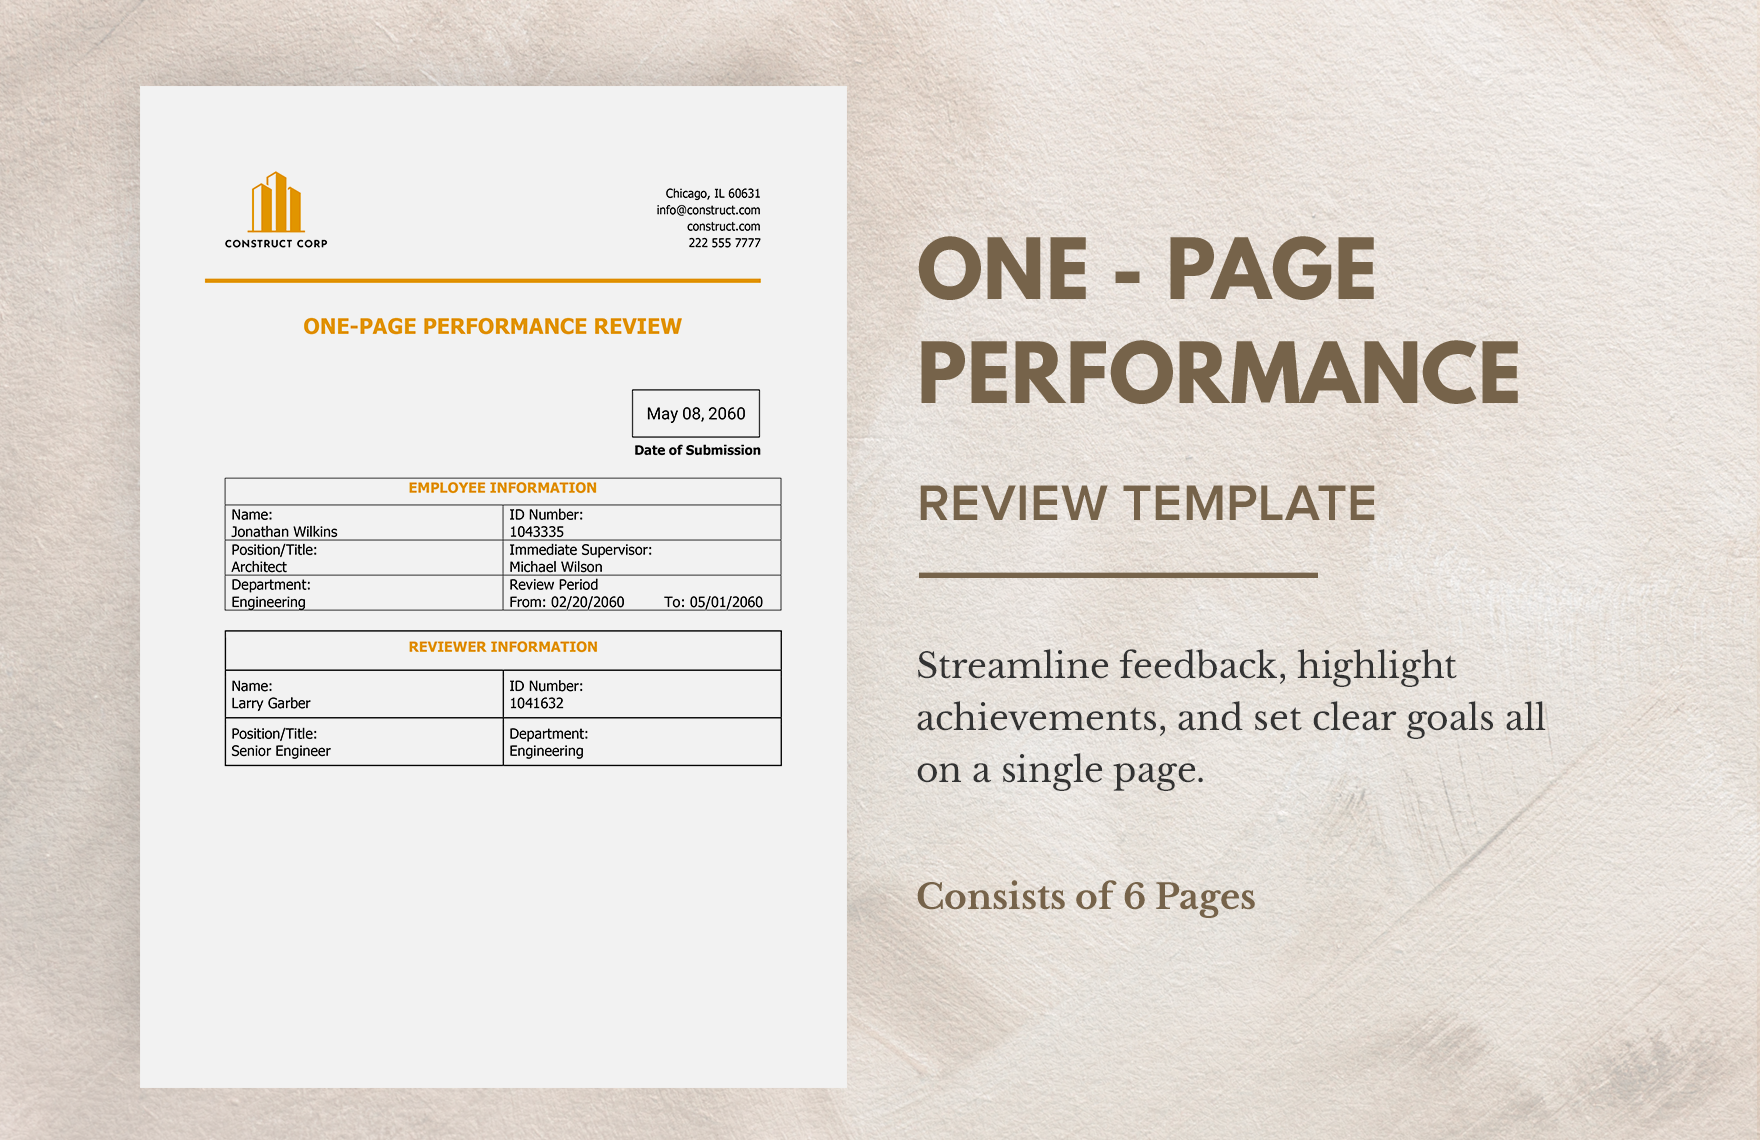 One-page Performance Review Template